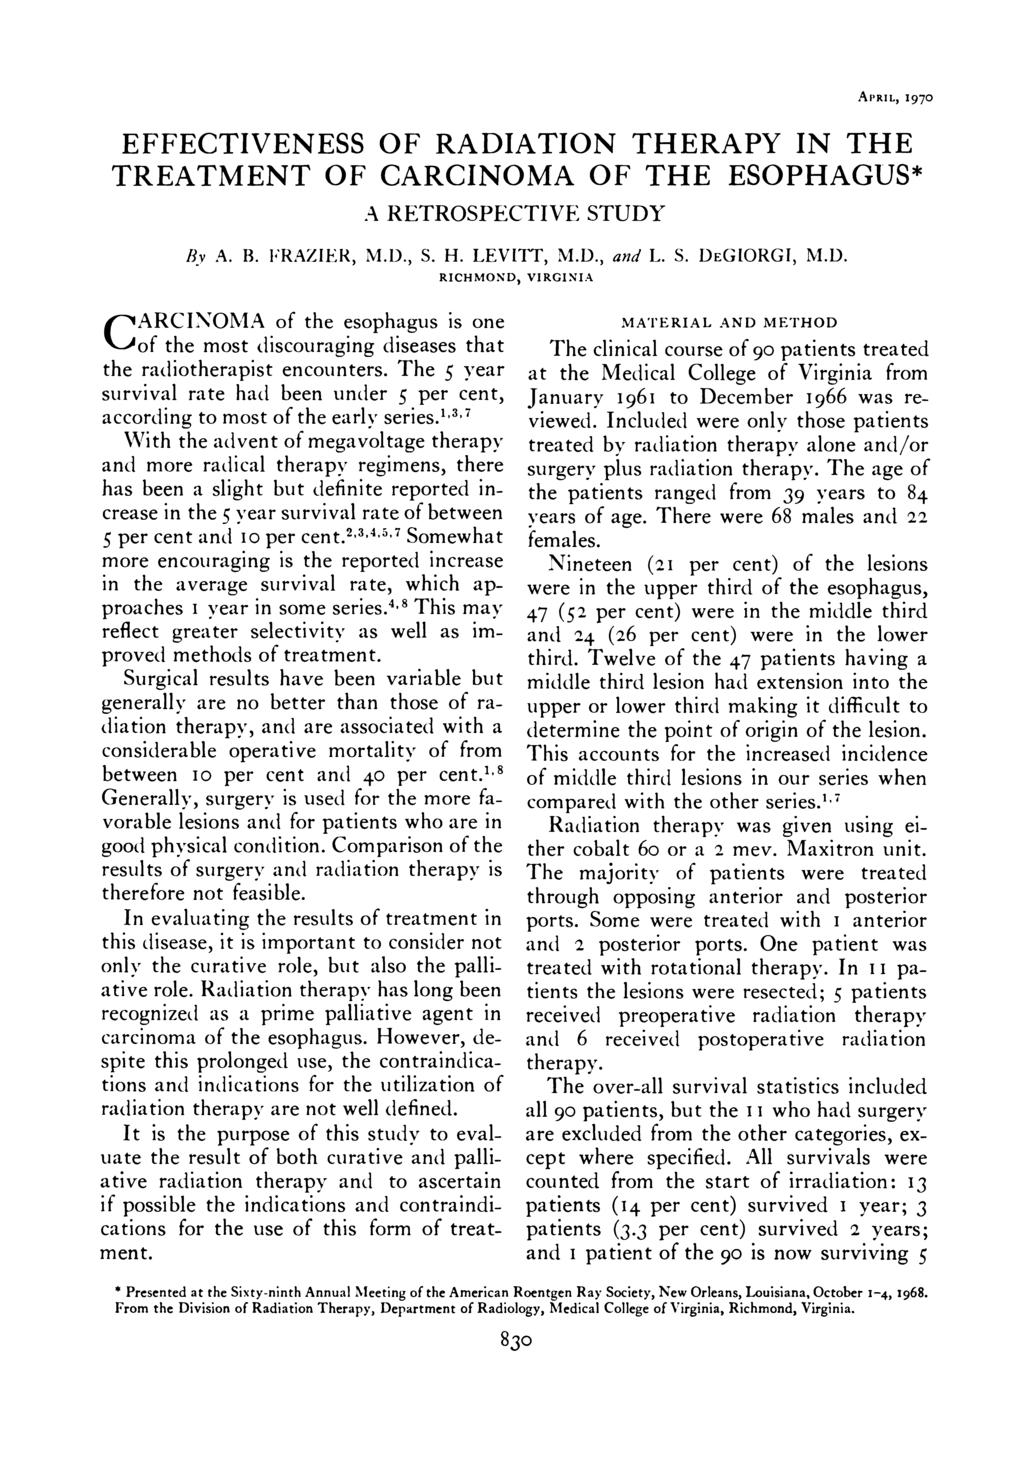 APRIL, 1970 EFFECTIVENESS OF RADIATION THERAPY IN THE TREATMENT OF CARCINOMA OF THE ESOPHAGUS* A RETROSPECTIVE STUDY Bv A. B. l RAZIER, M.I)., S. H. LEVITT, M.D., and L. S. DEGIORGI, M.D. RICHMOND, CARCINOMA of the esophagus is one of the most discouraging diseases that the radiotherapist encounters.